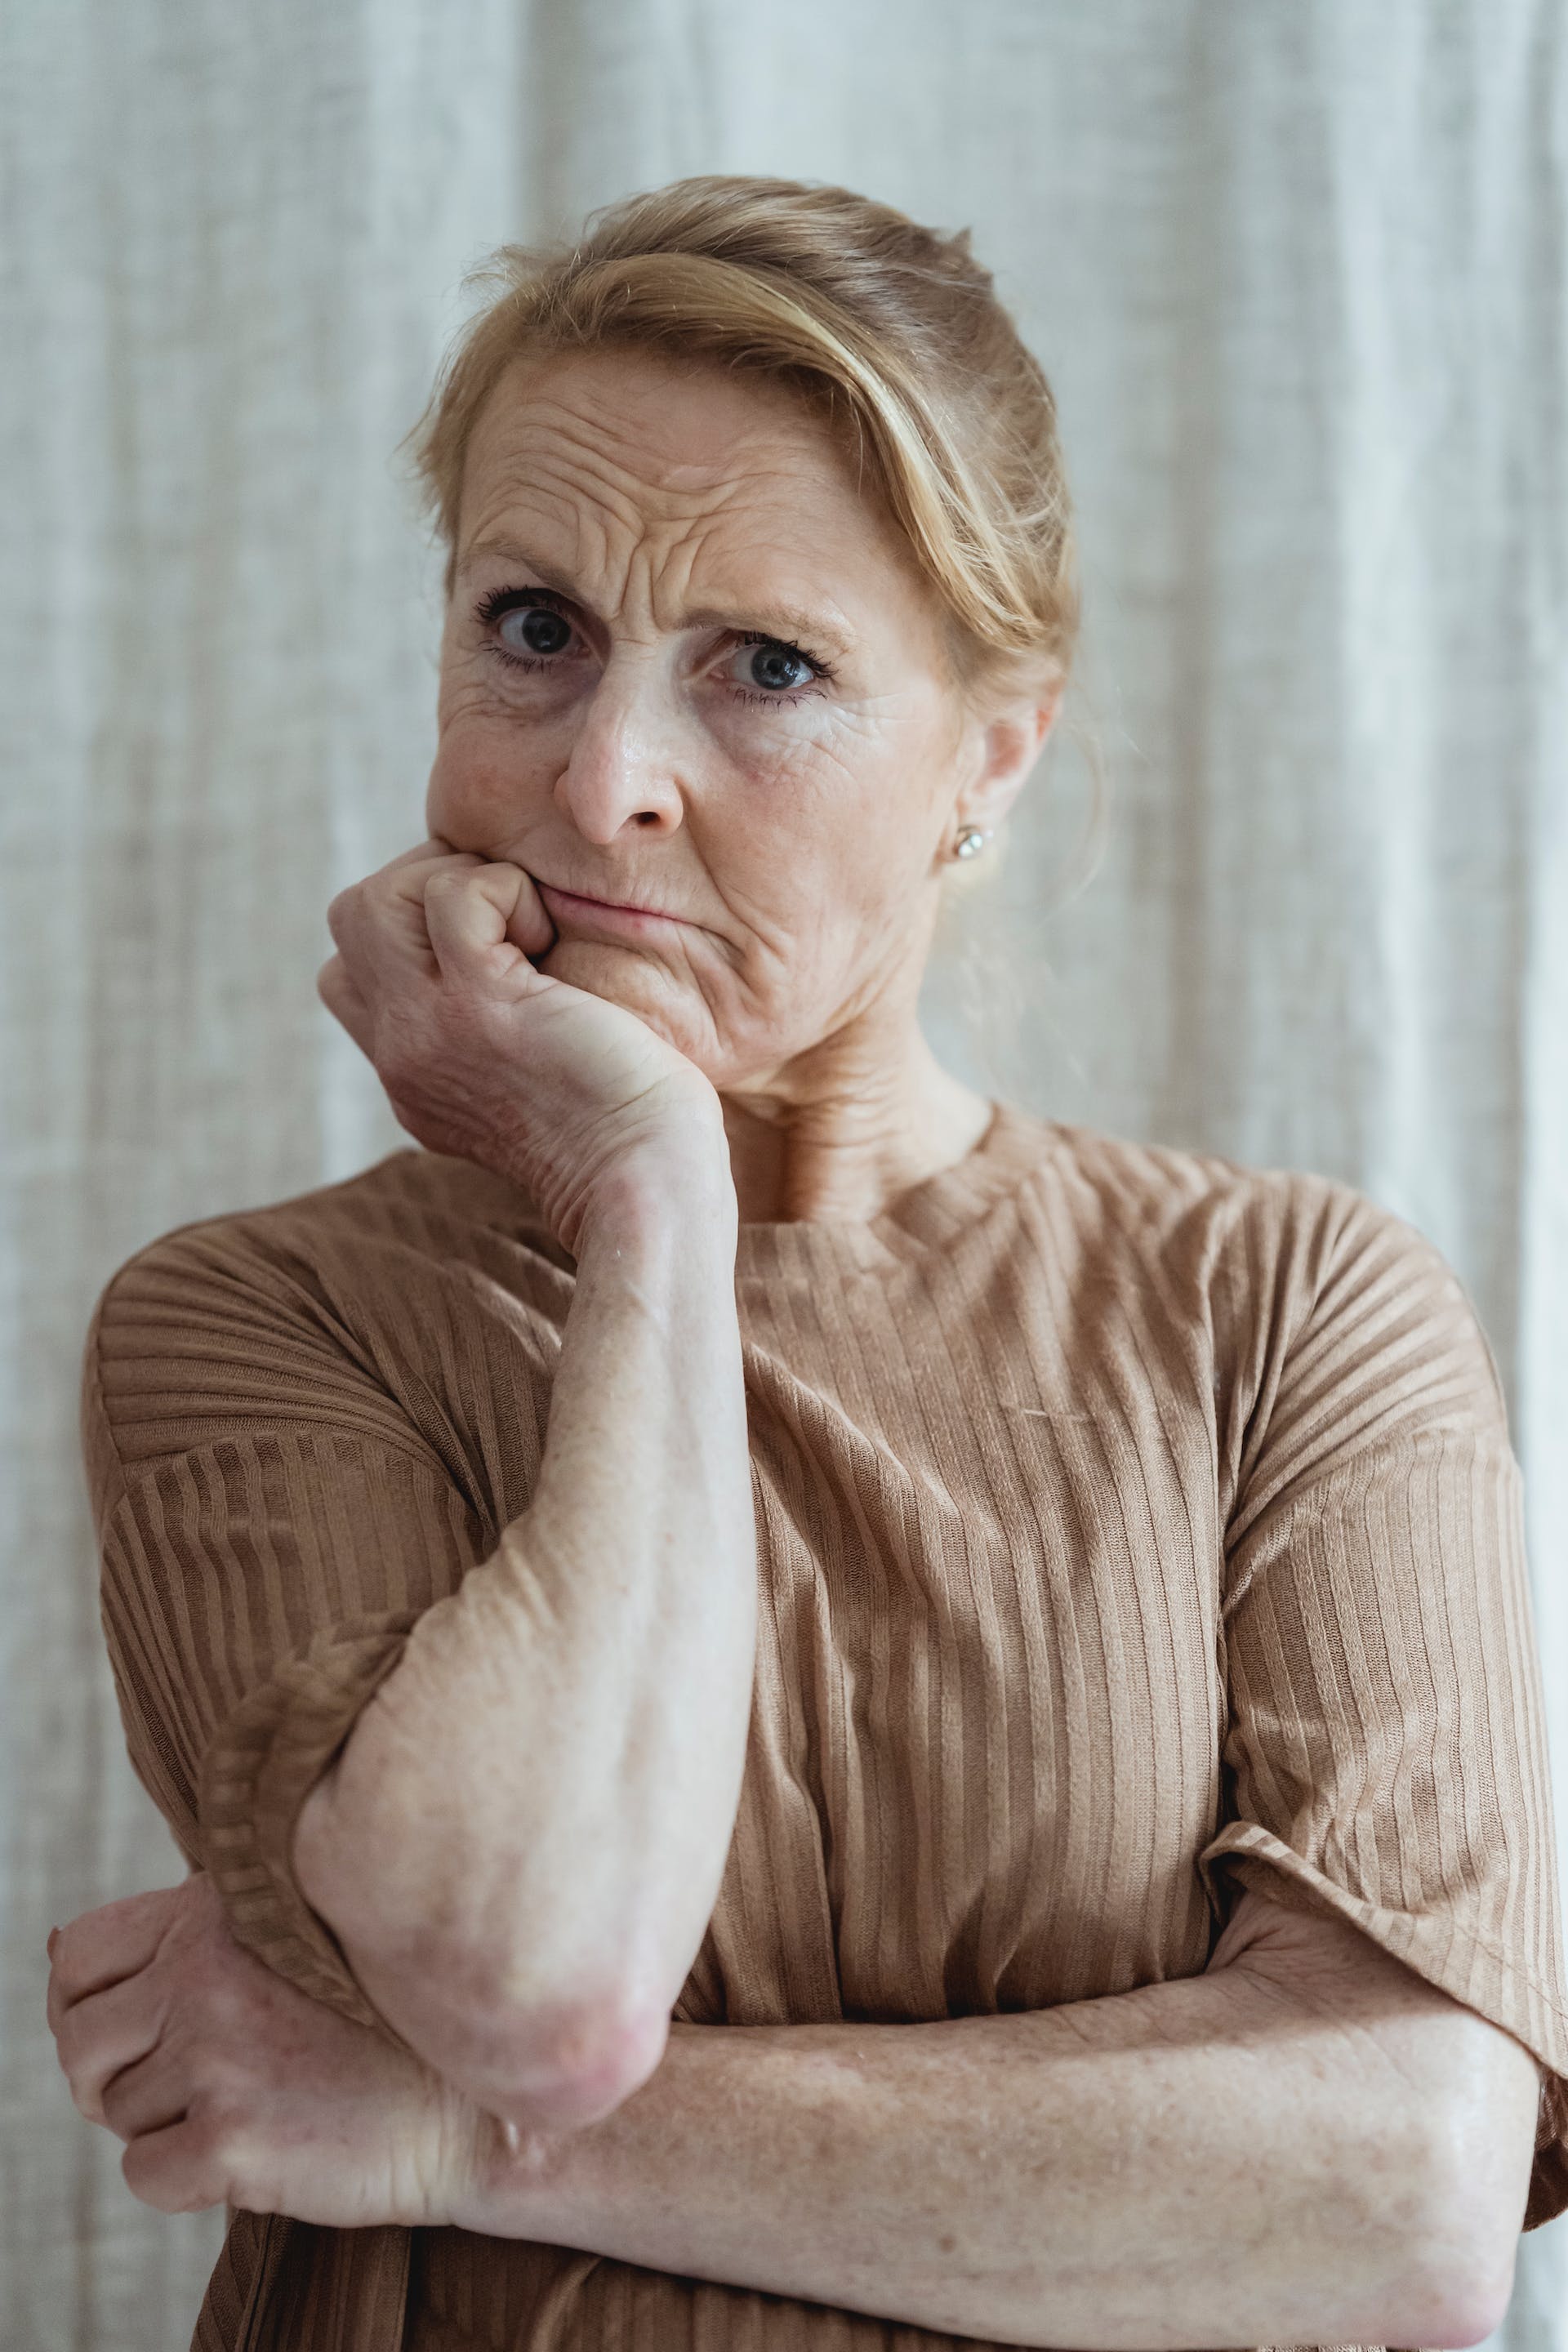 An older woman thinking about something | Source: Pexels